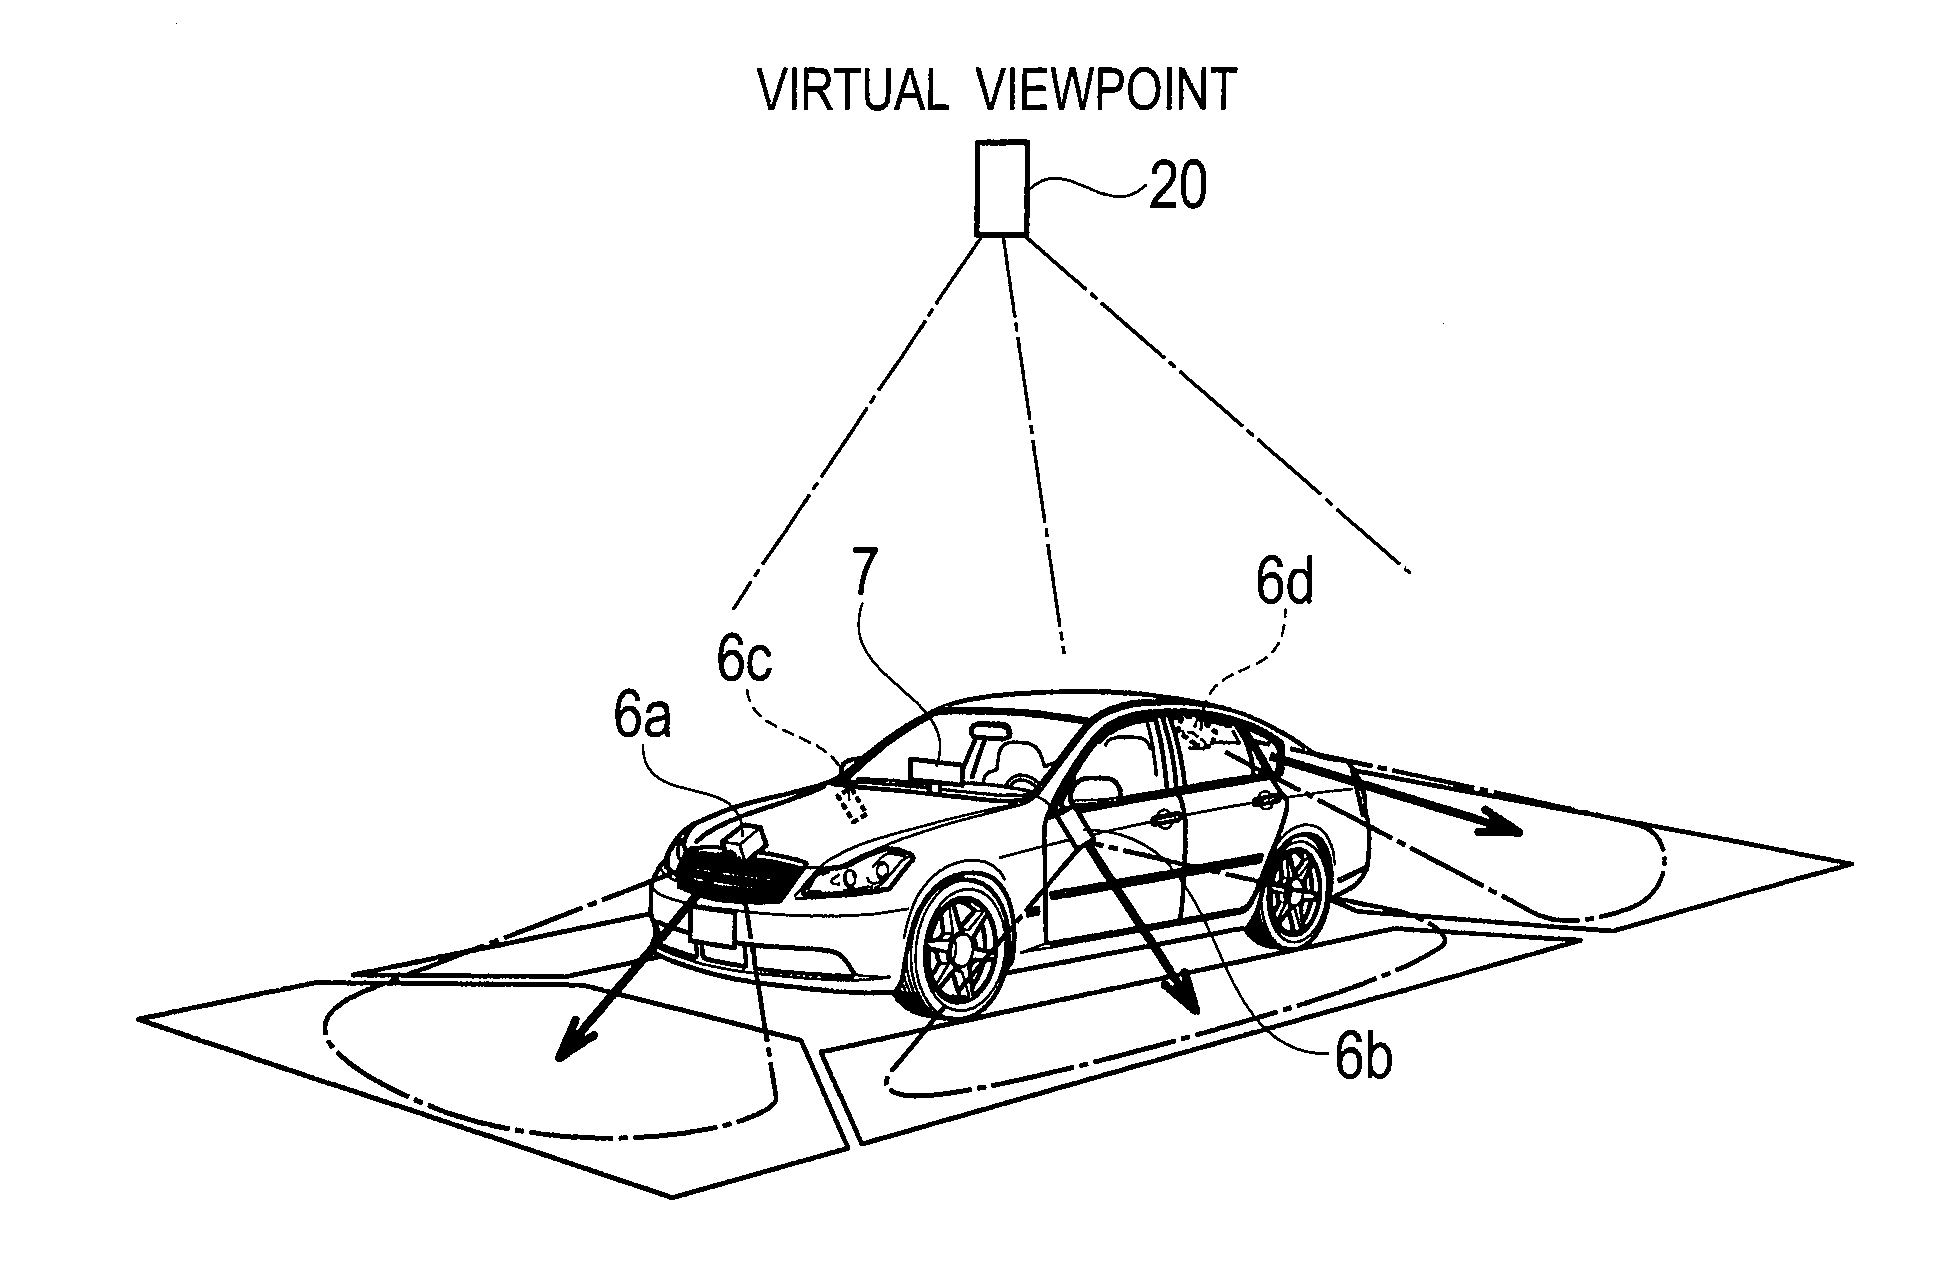 Parking mode selection apparatus and method